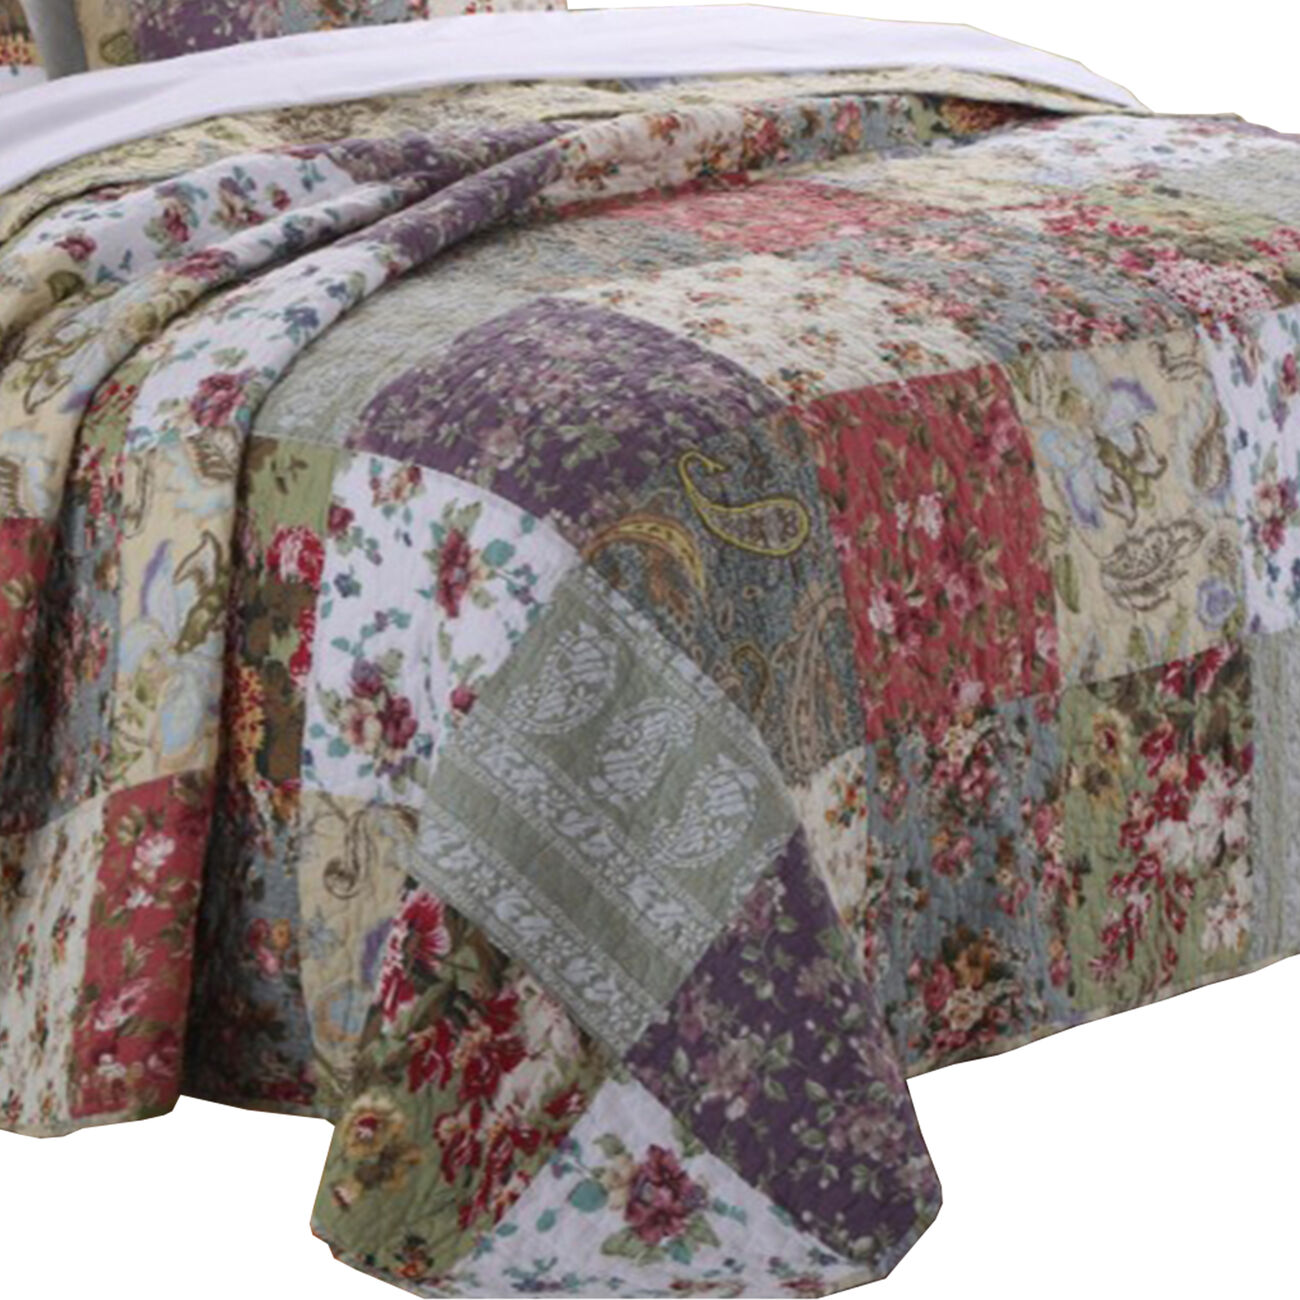 Chicago 3 Piece Fabric Full Bedspread Set with Jacobean Prints, Multicolor